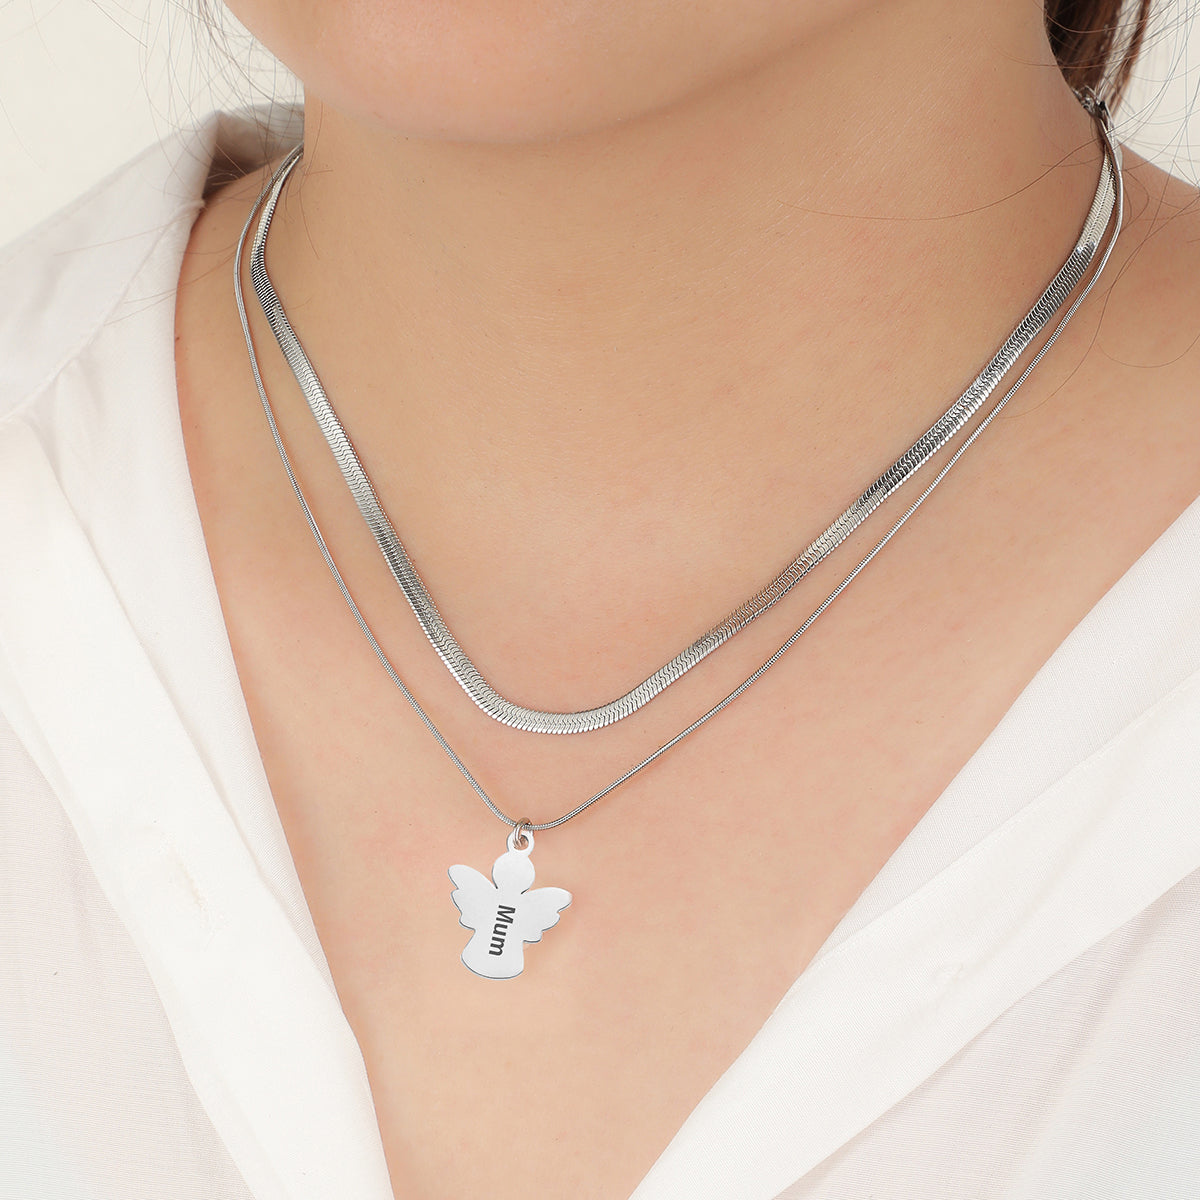 Personalised memorial angel layered necklace